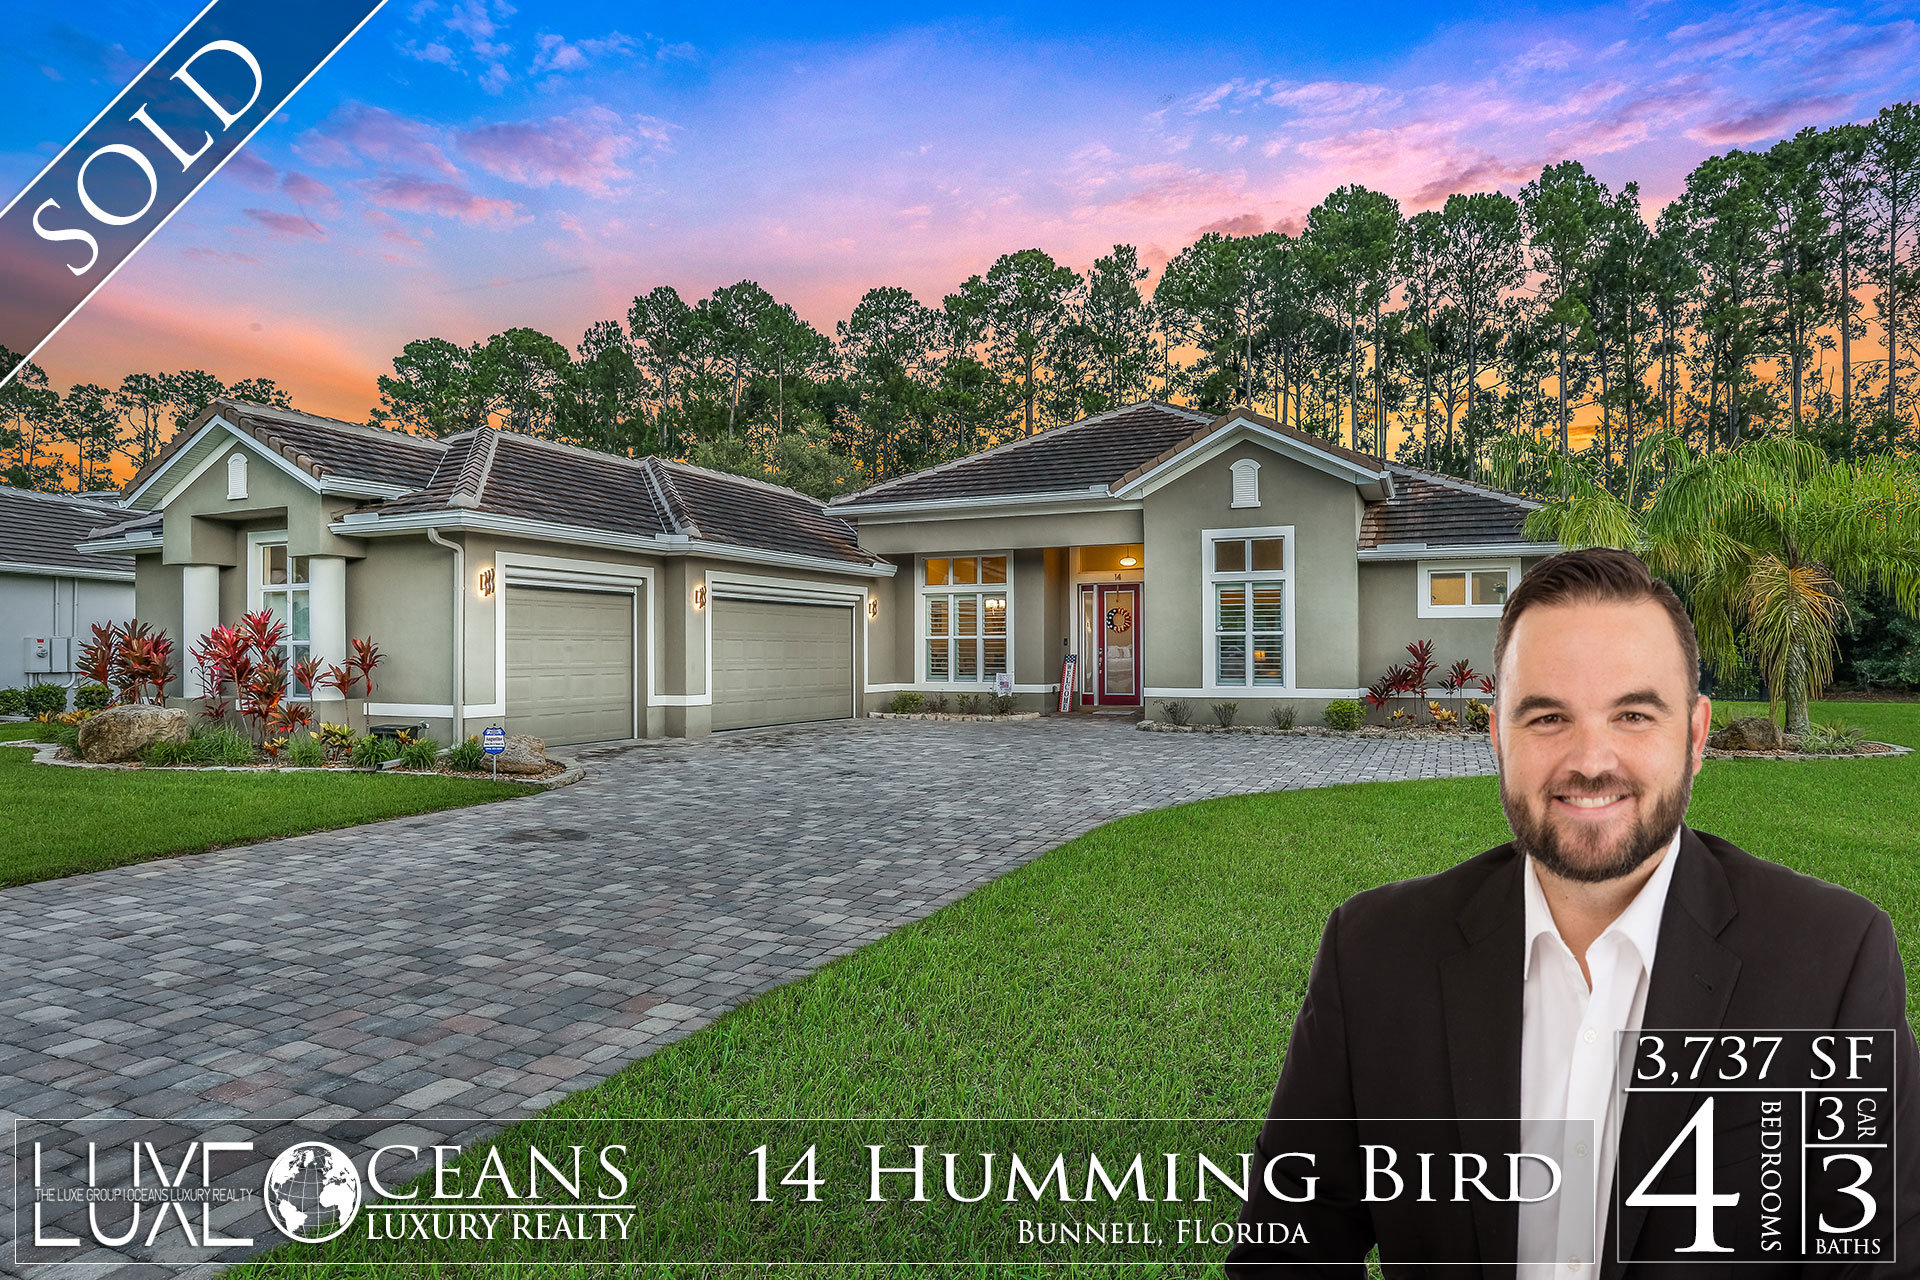 Gated homes for sale - 14 Humming Bird Circle Bunnel, Florida Real Estate Just Sold